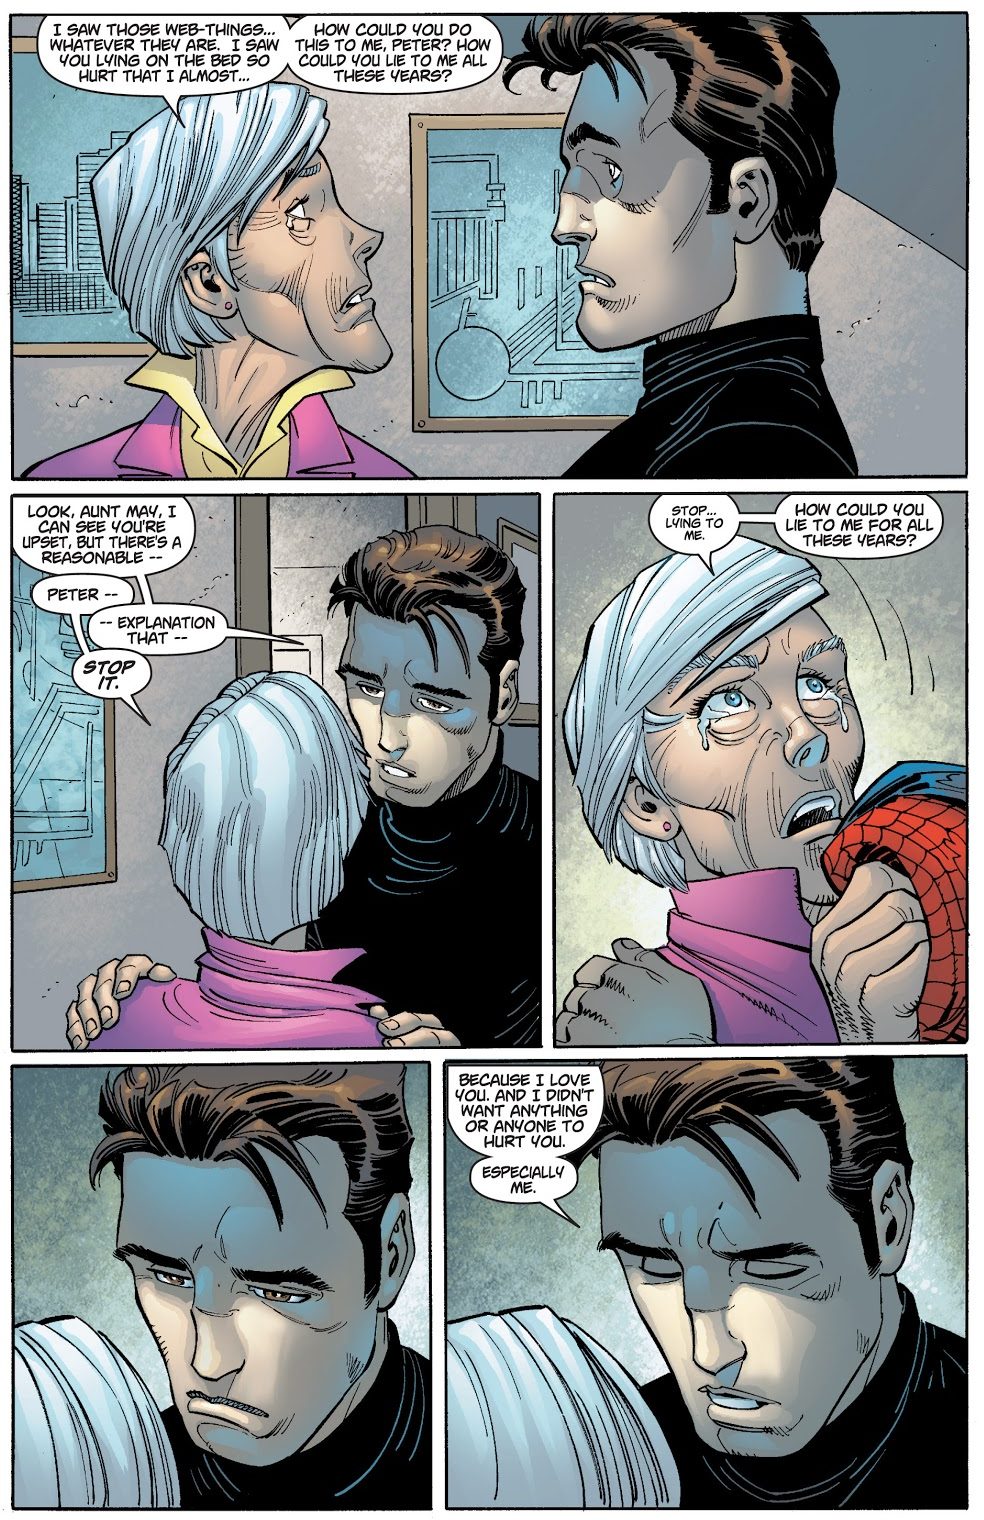 From - The Amazing Spider-Man Vol. 2 #38